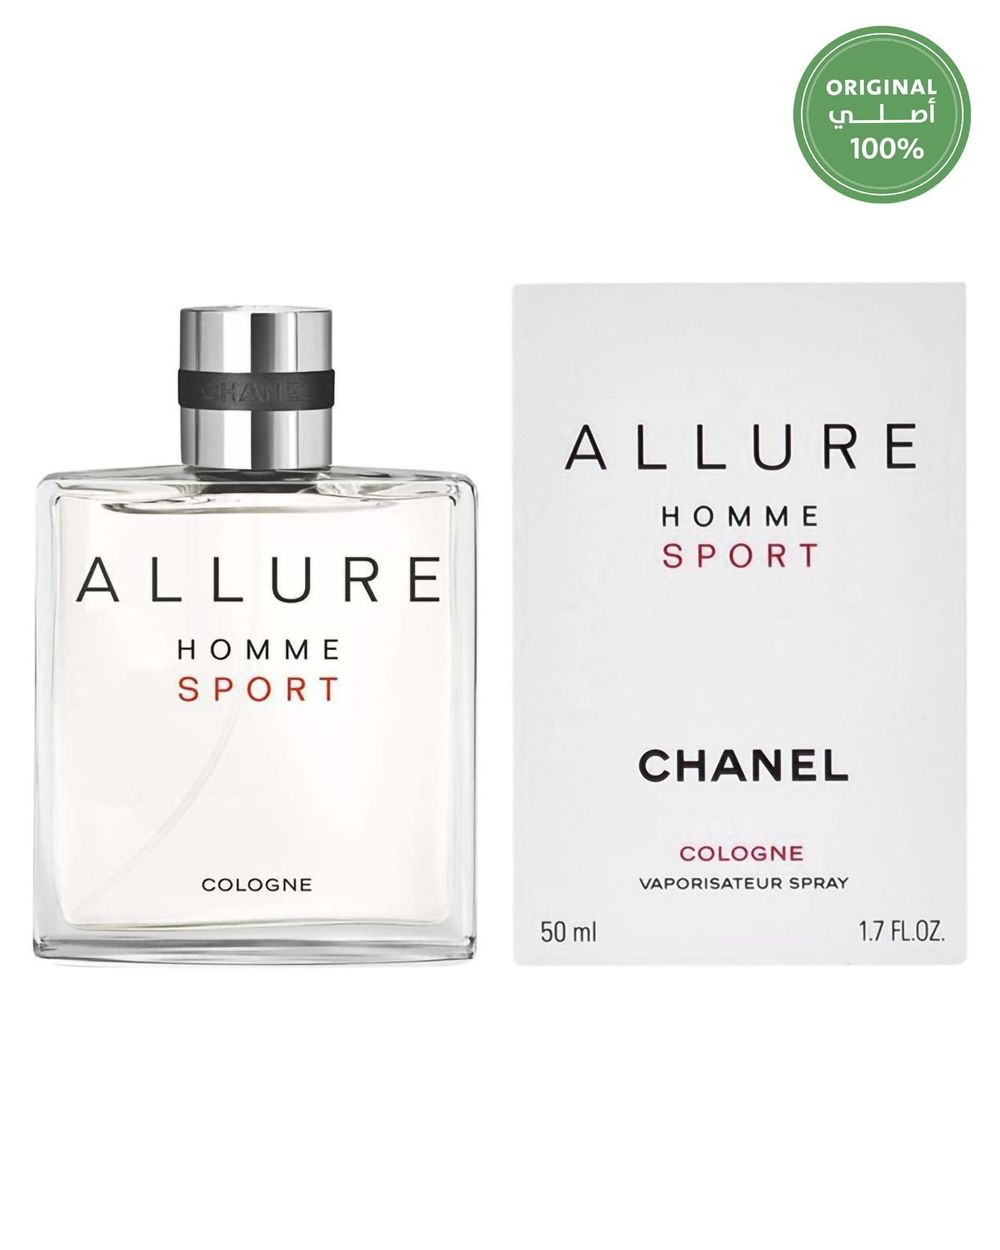 Chanel homme cologne. Шанель Аллюр спорт 50 мл. Chanel Allure homme Sport 50ml. Chanel Allure Sport men 50ml Cologne. Chanel Allure homme 50 мл.